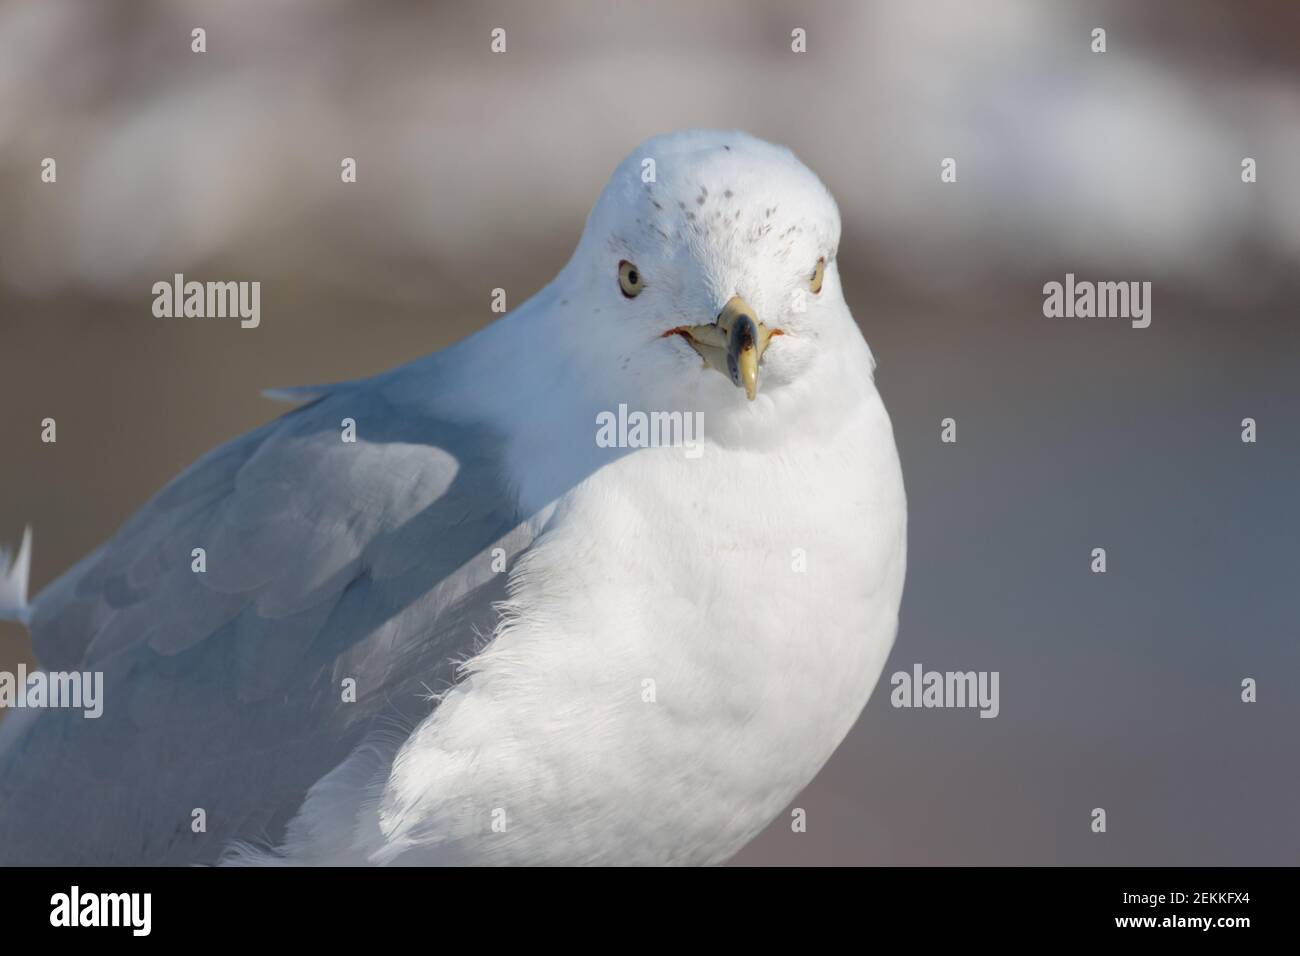 close up frontal view of face of a ring-billed gull looking directly at the camera Stock Photo